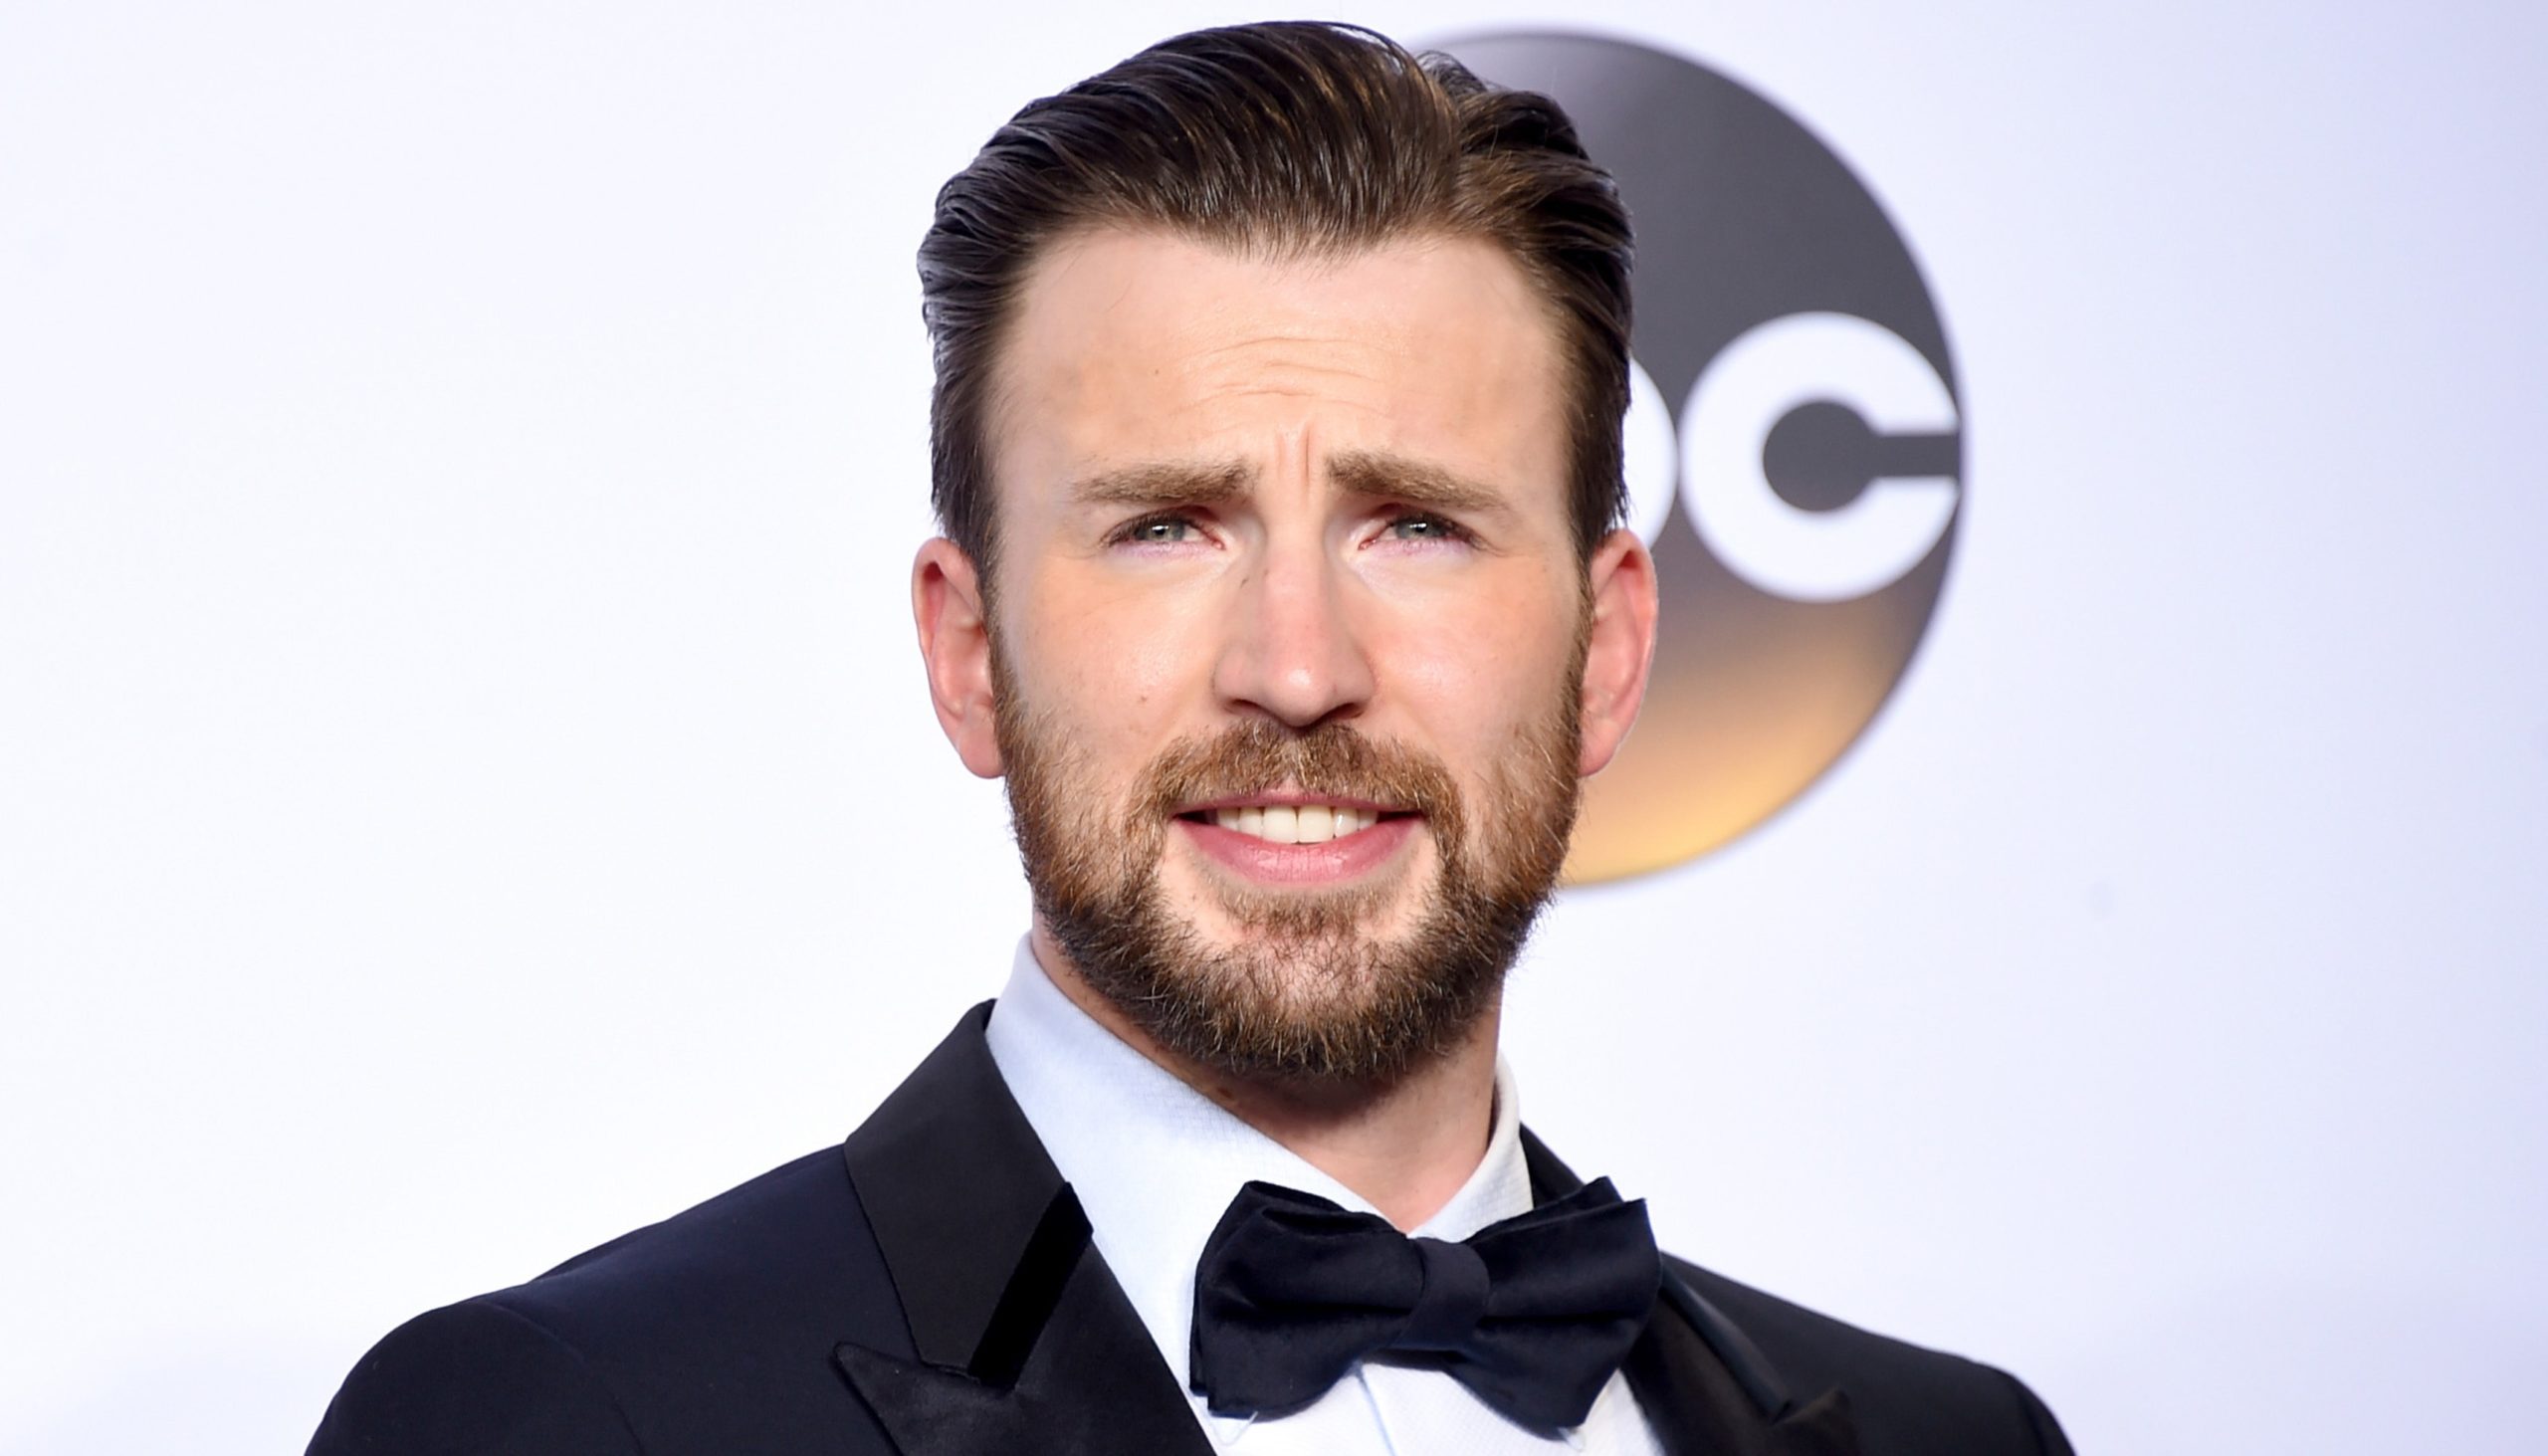 Chris Evans Has Been Secretly Covered in Tattoos This Whole Time